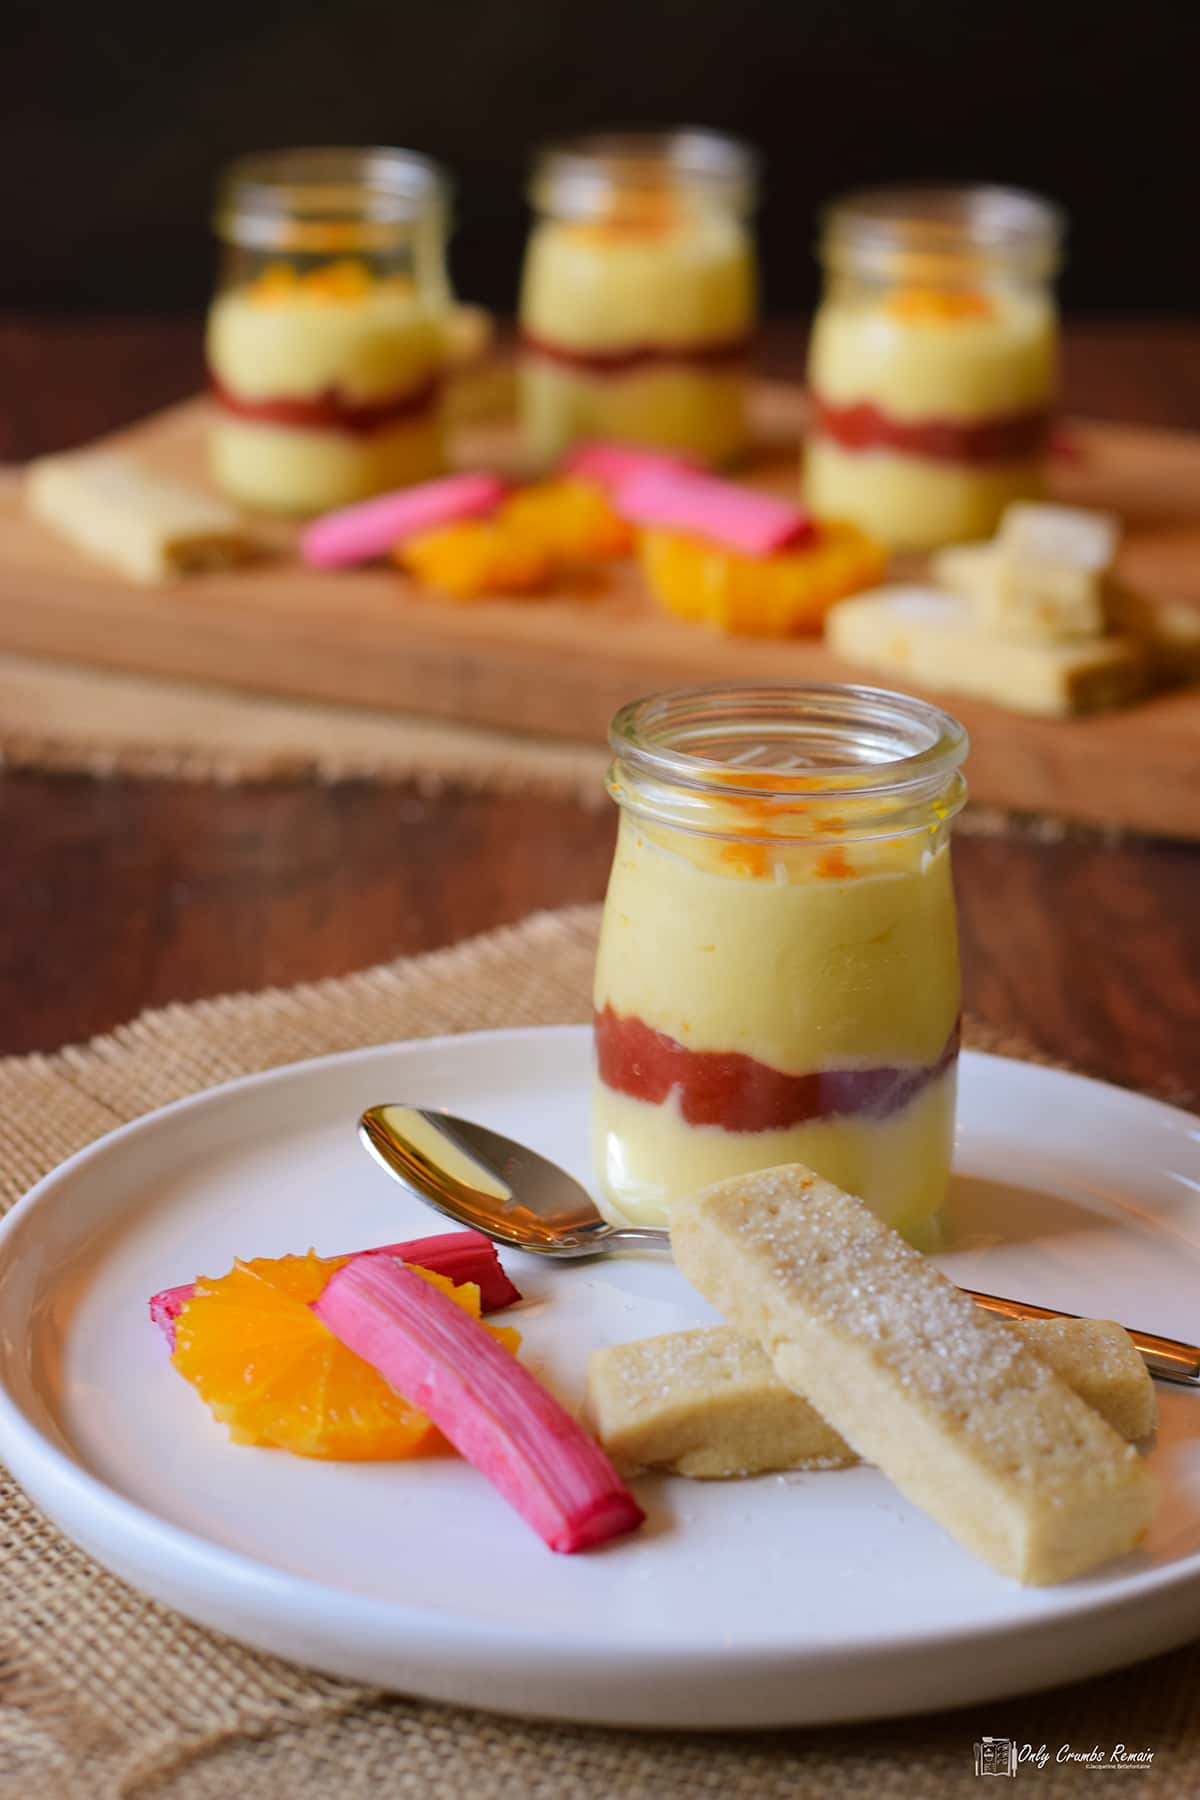 orange posset layered with rhubarb compote in glass jar served with shortbread orange slices and rhubarb batons.